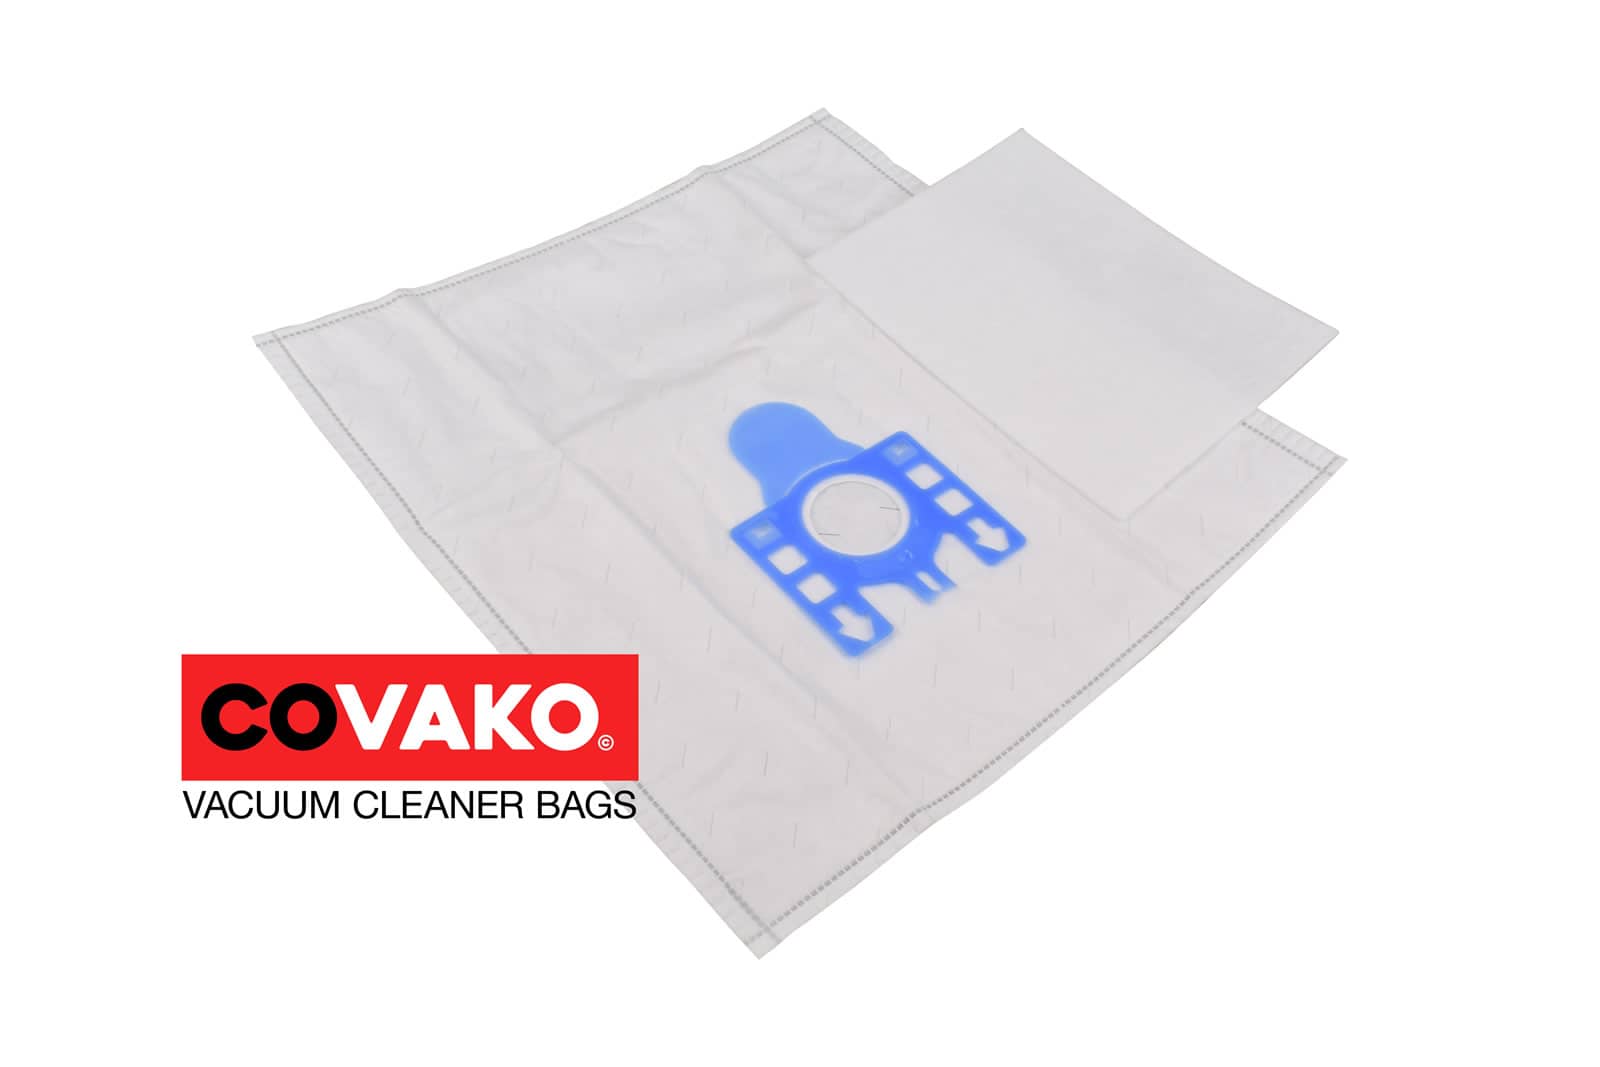 Electrolux CE 1800 Comfort-Vampyr / Synthesis - Electrolux vacuum cleaner bags